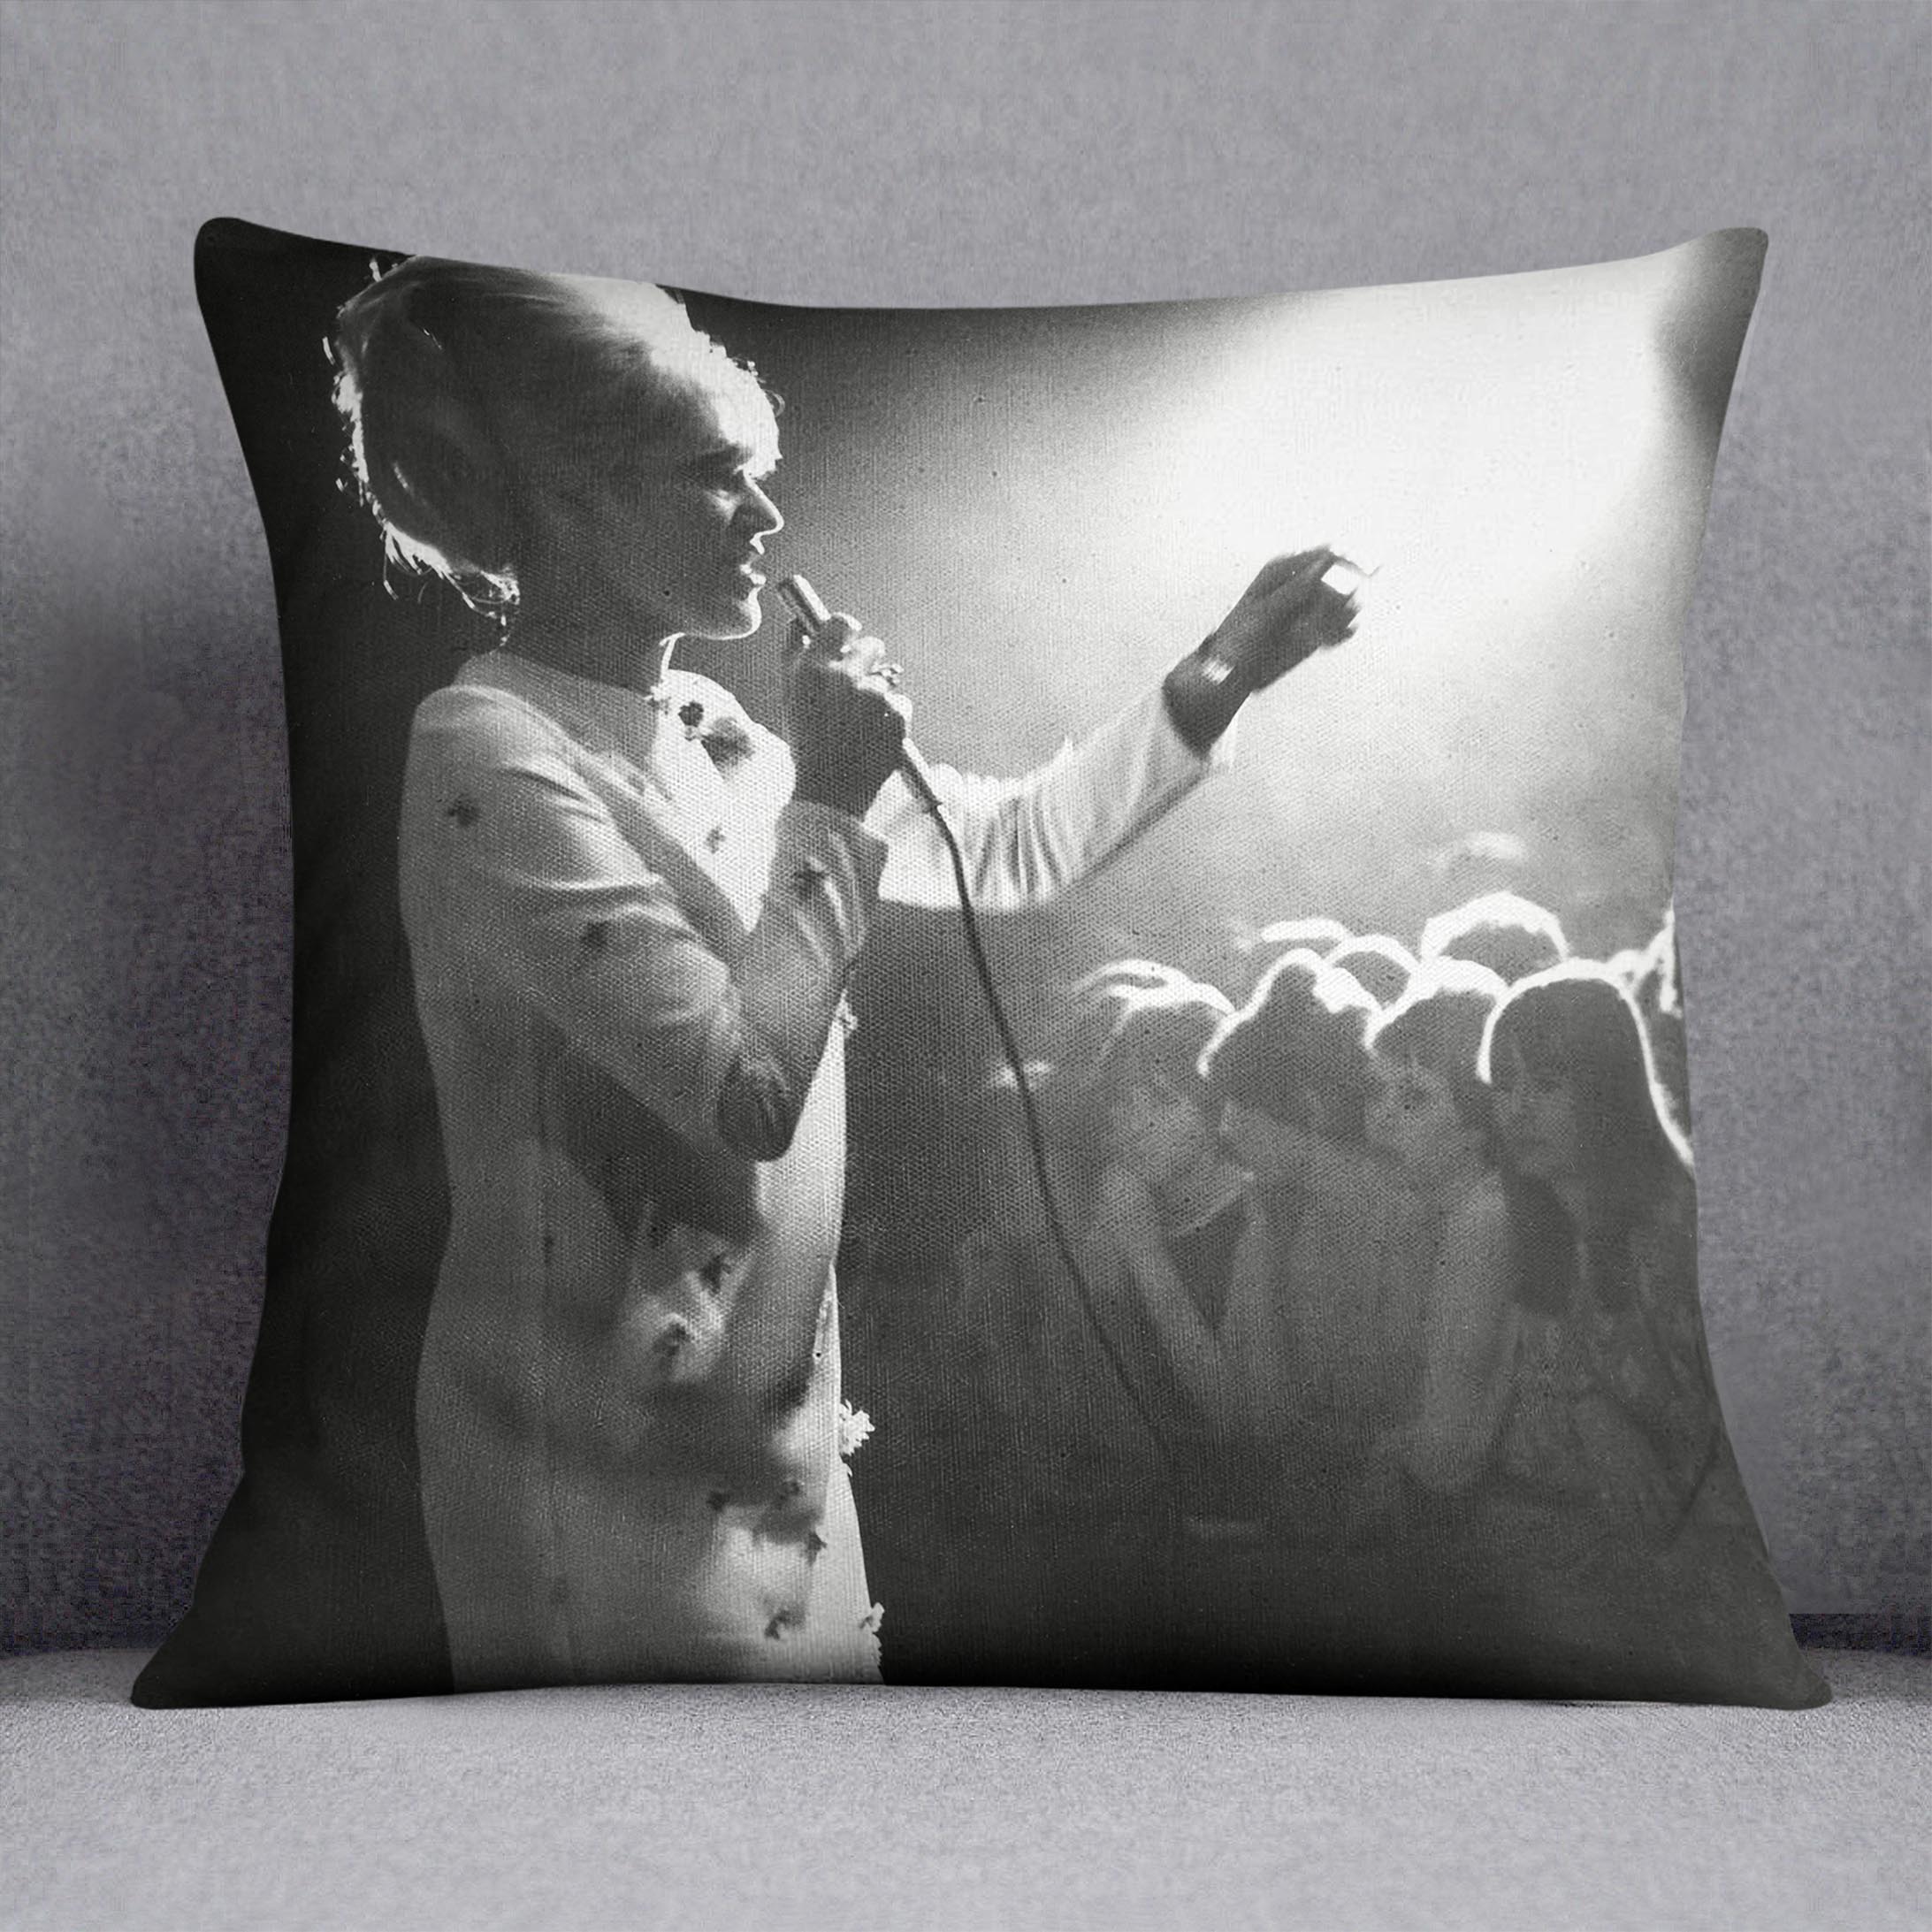 Dusty Springfield in the light Cushion